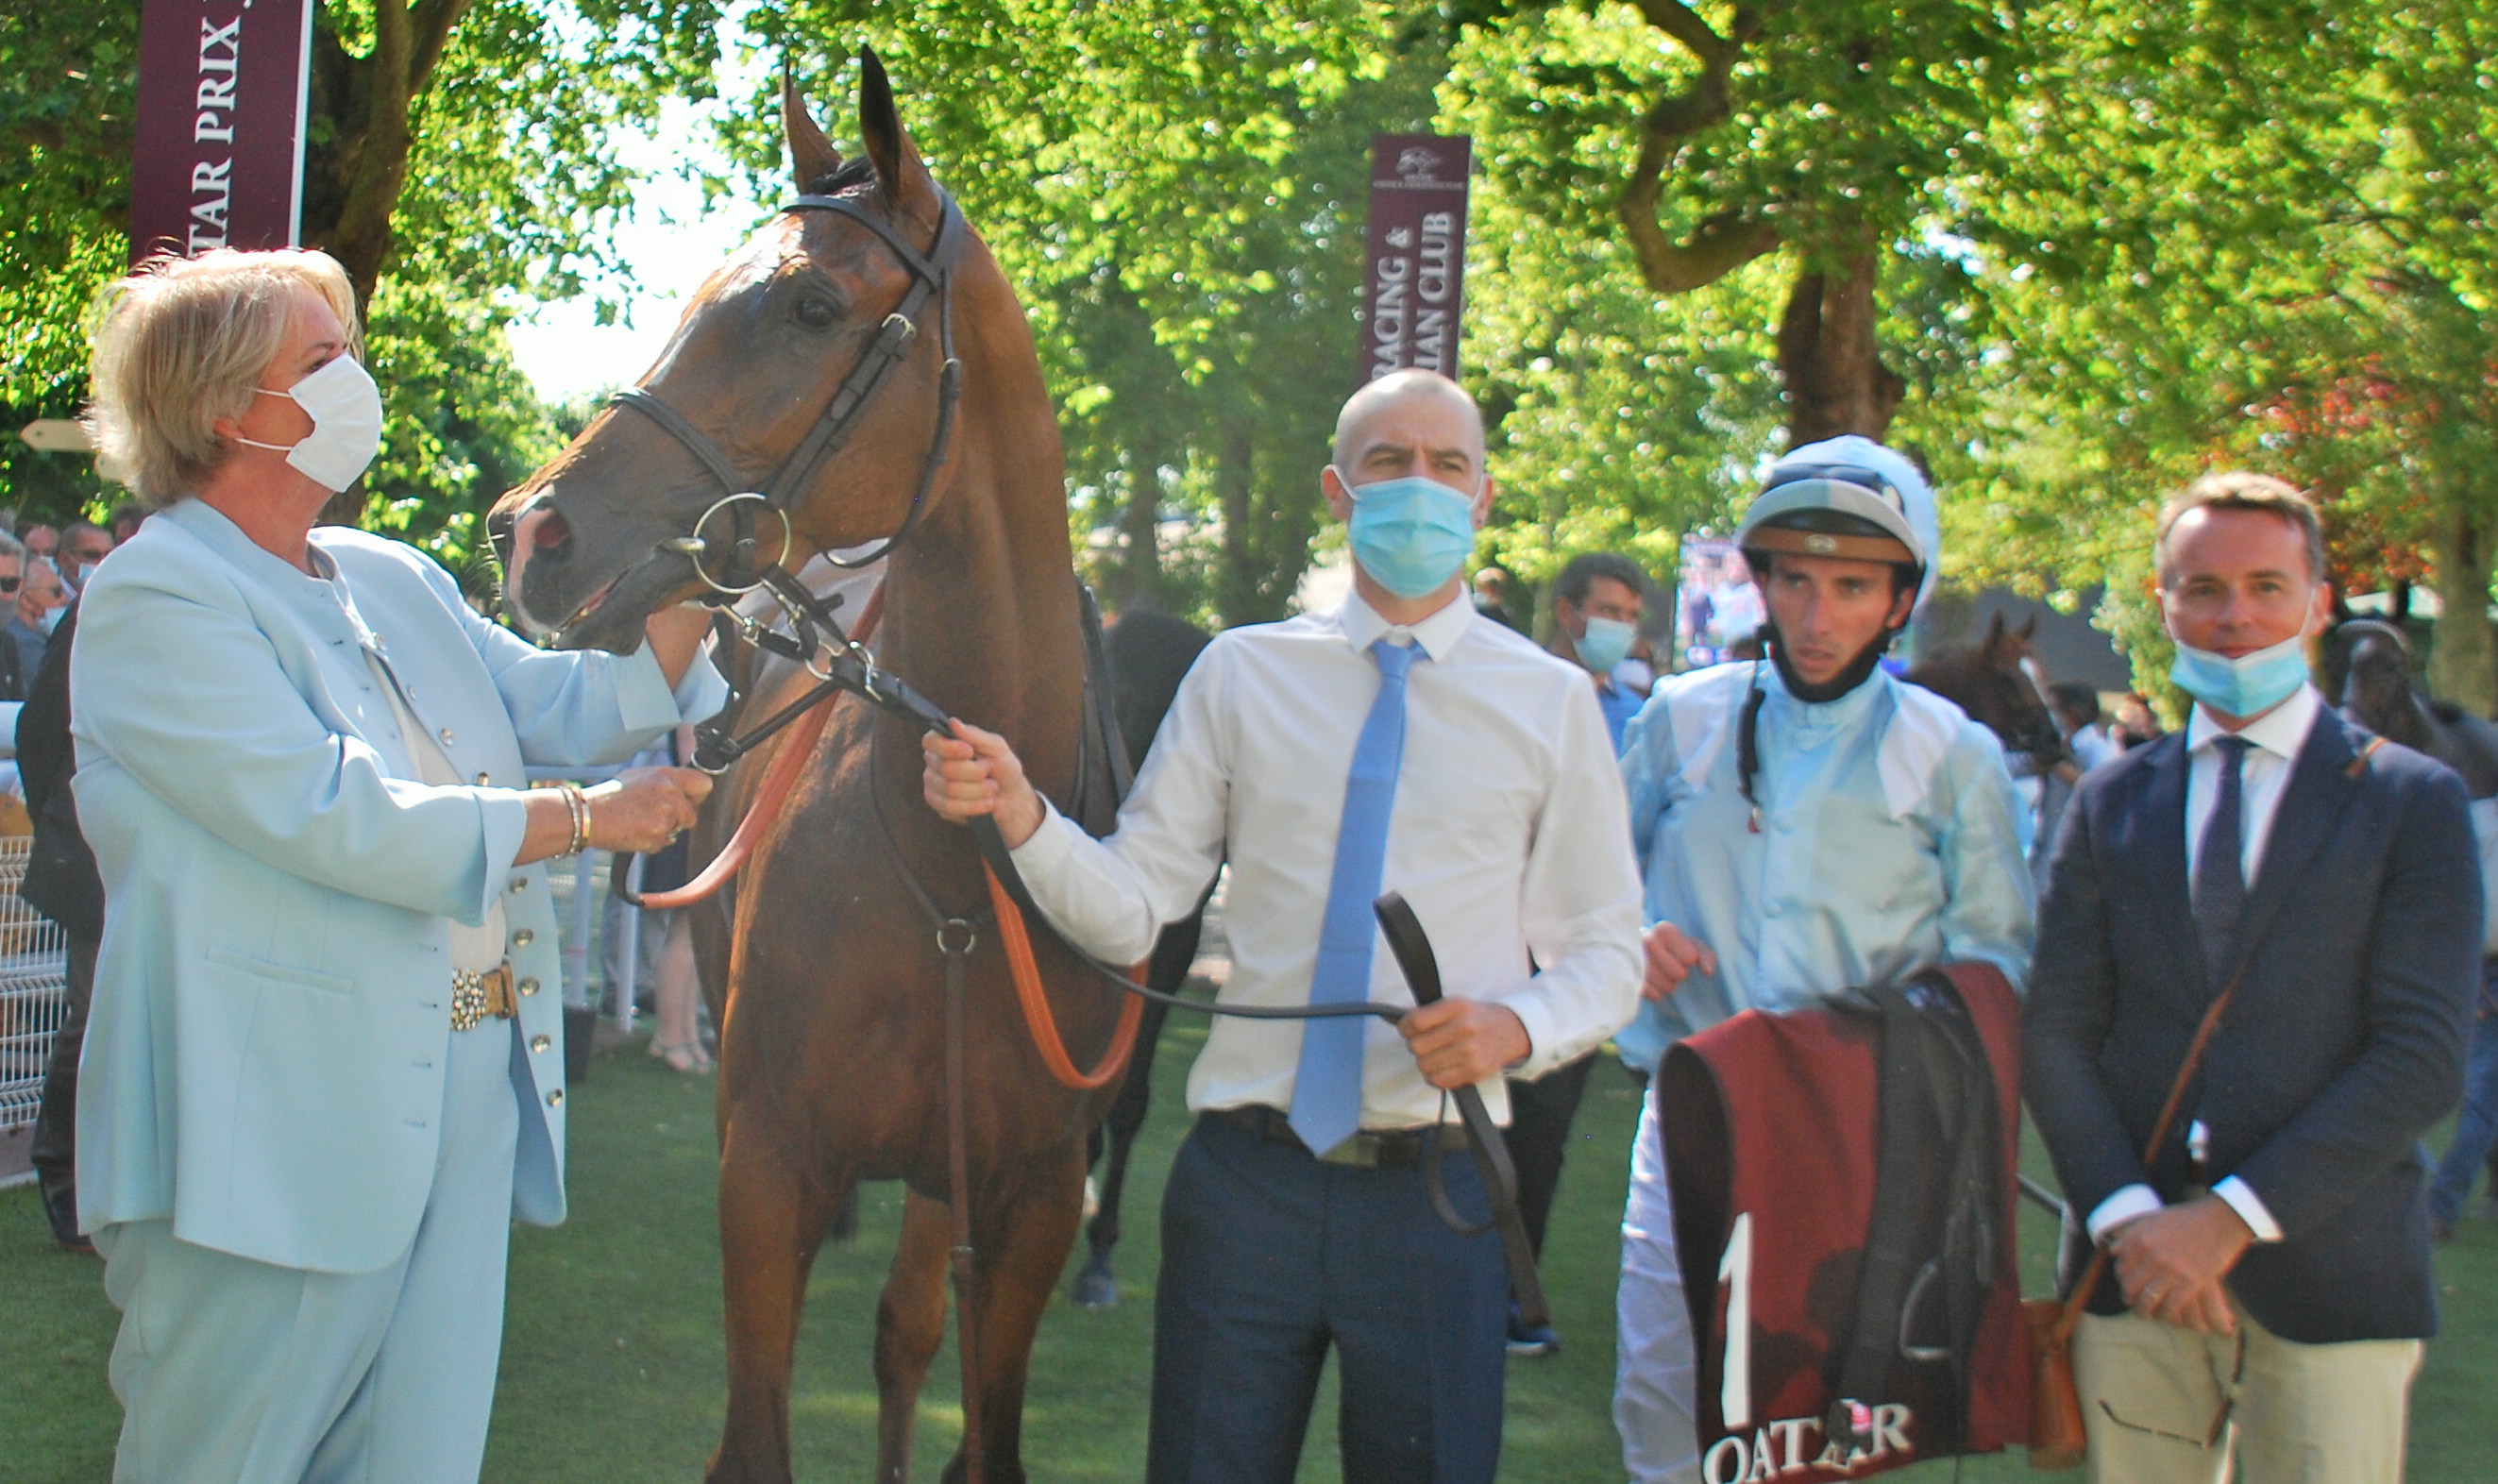 Antoinette Tamagni-Bodmer with Watch Me in the winner’s enclosure at Deauville on July 12. Trainer Francis-Henri Graffard is on the right. Photo: John Gilmore